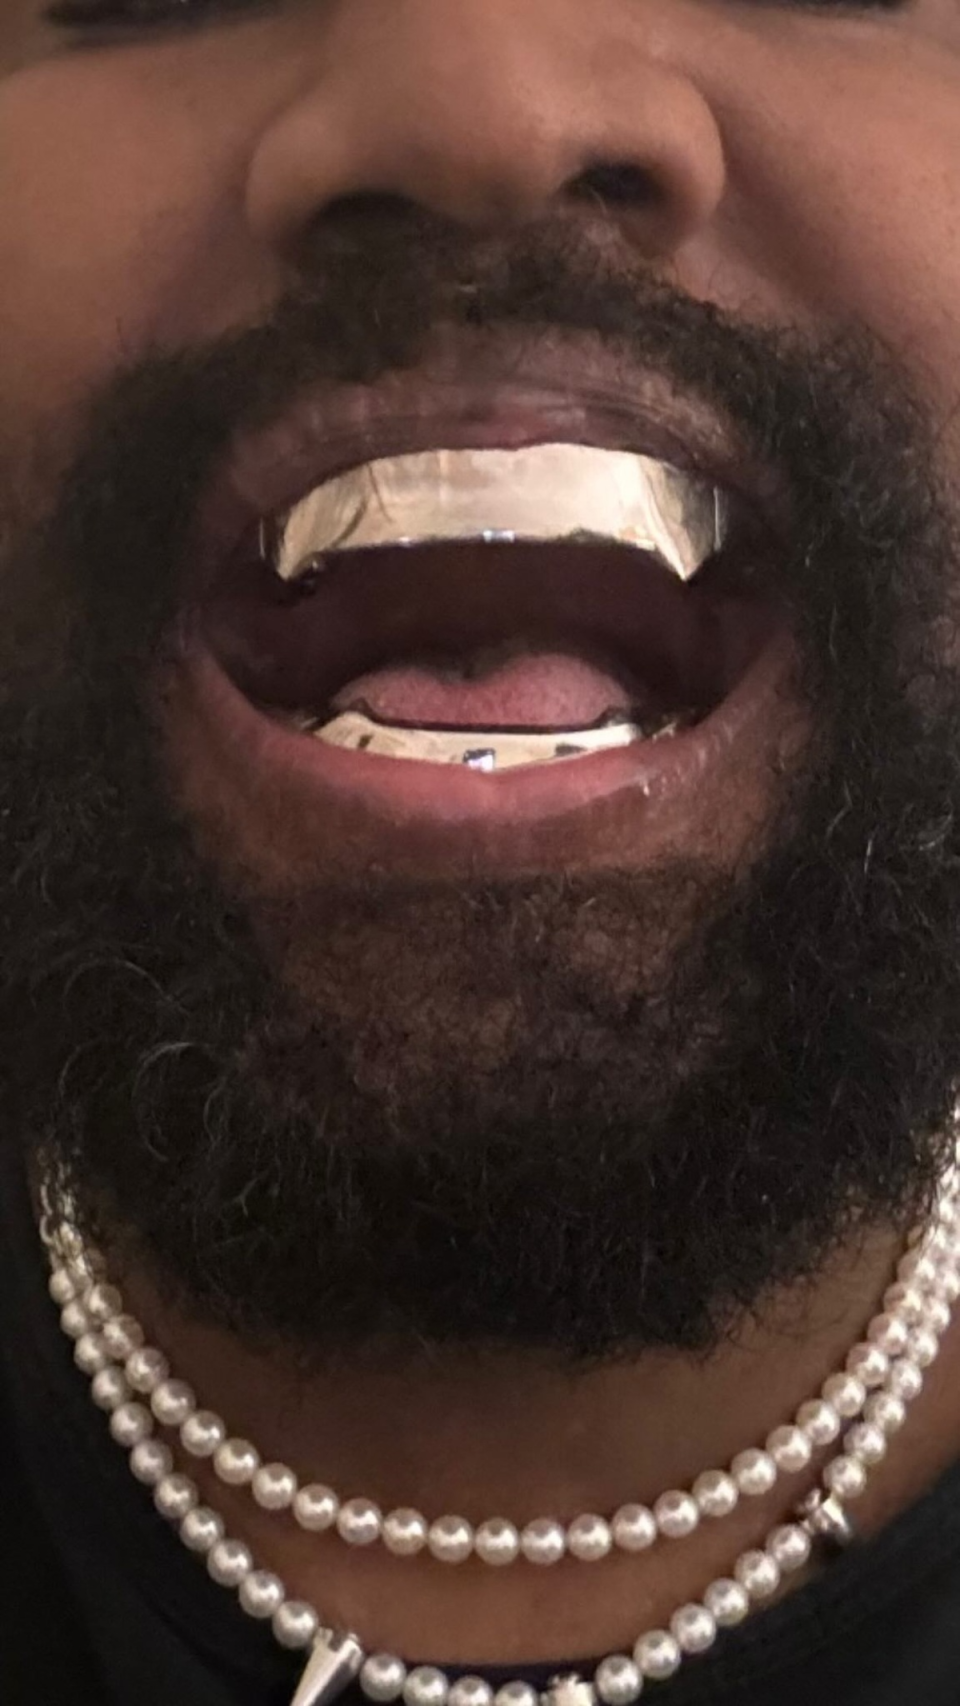 Kanye West shows off new Jawsinspired teeth after getting '£670,000